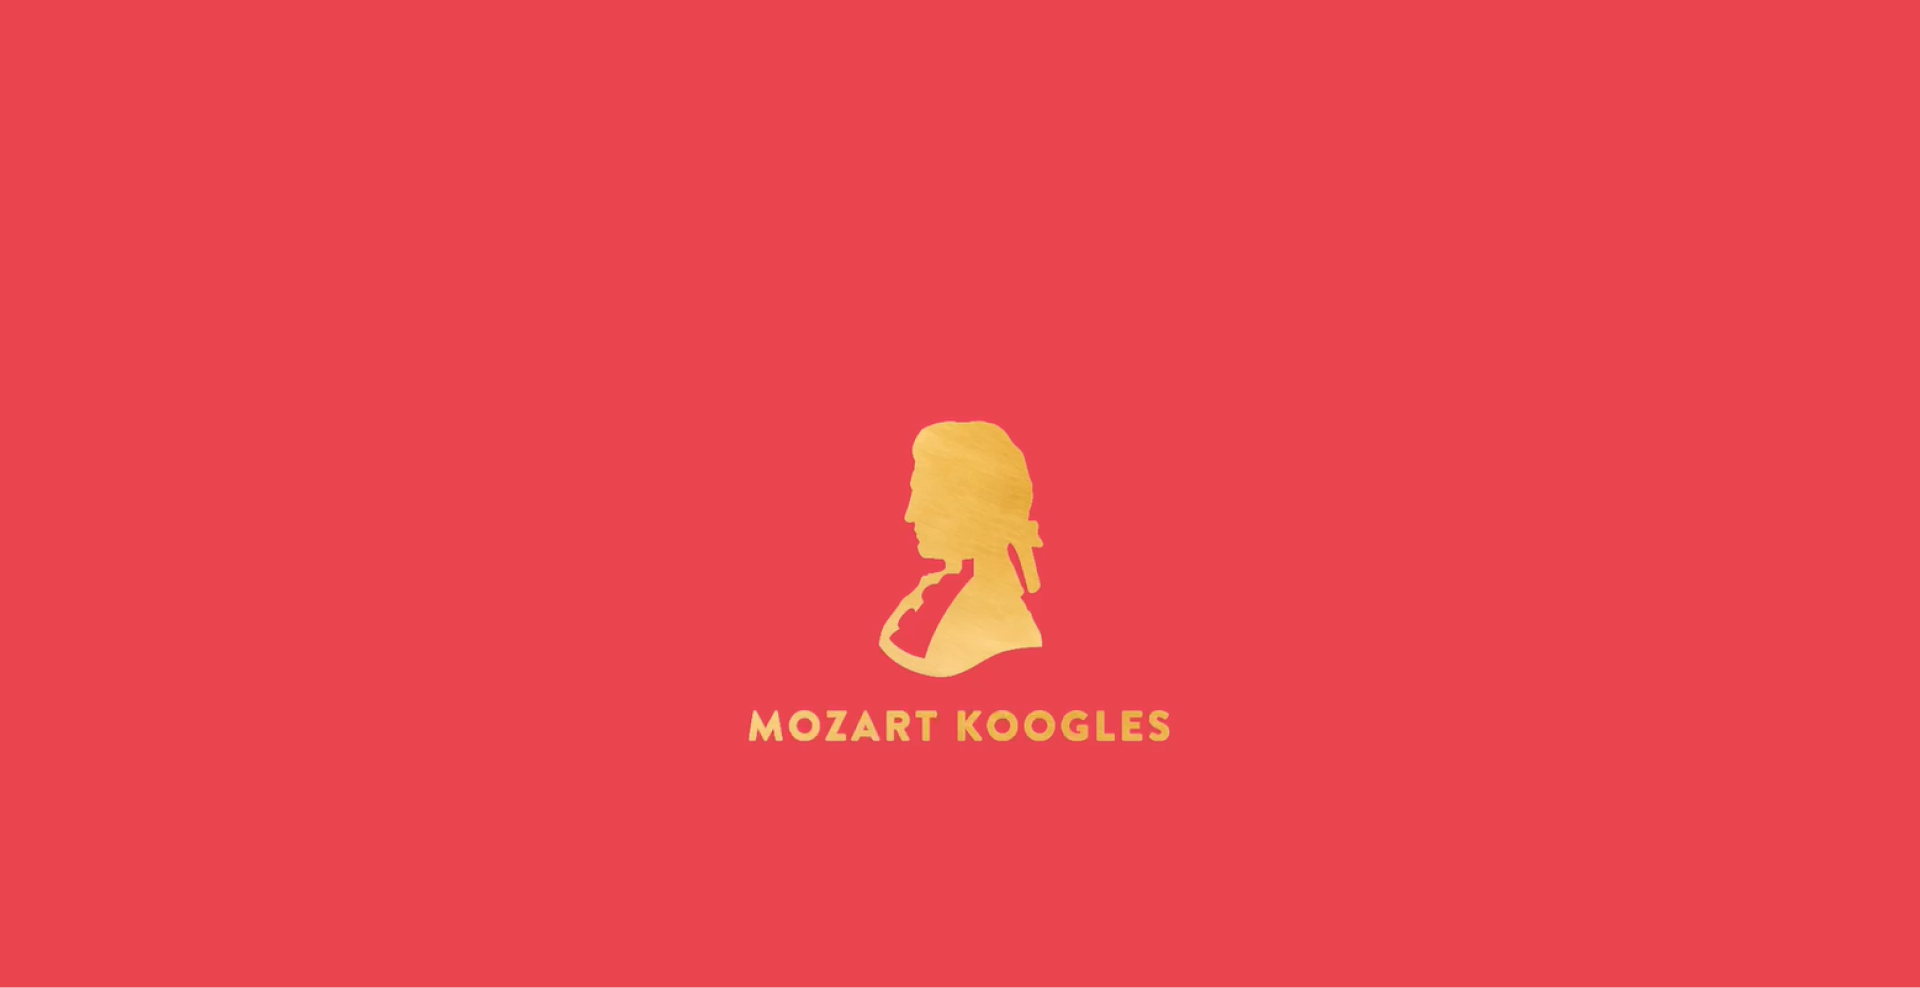 Who and what is Mozart Koogles?